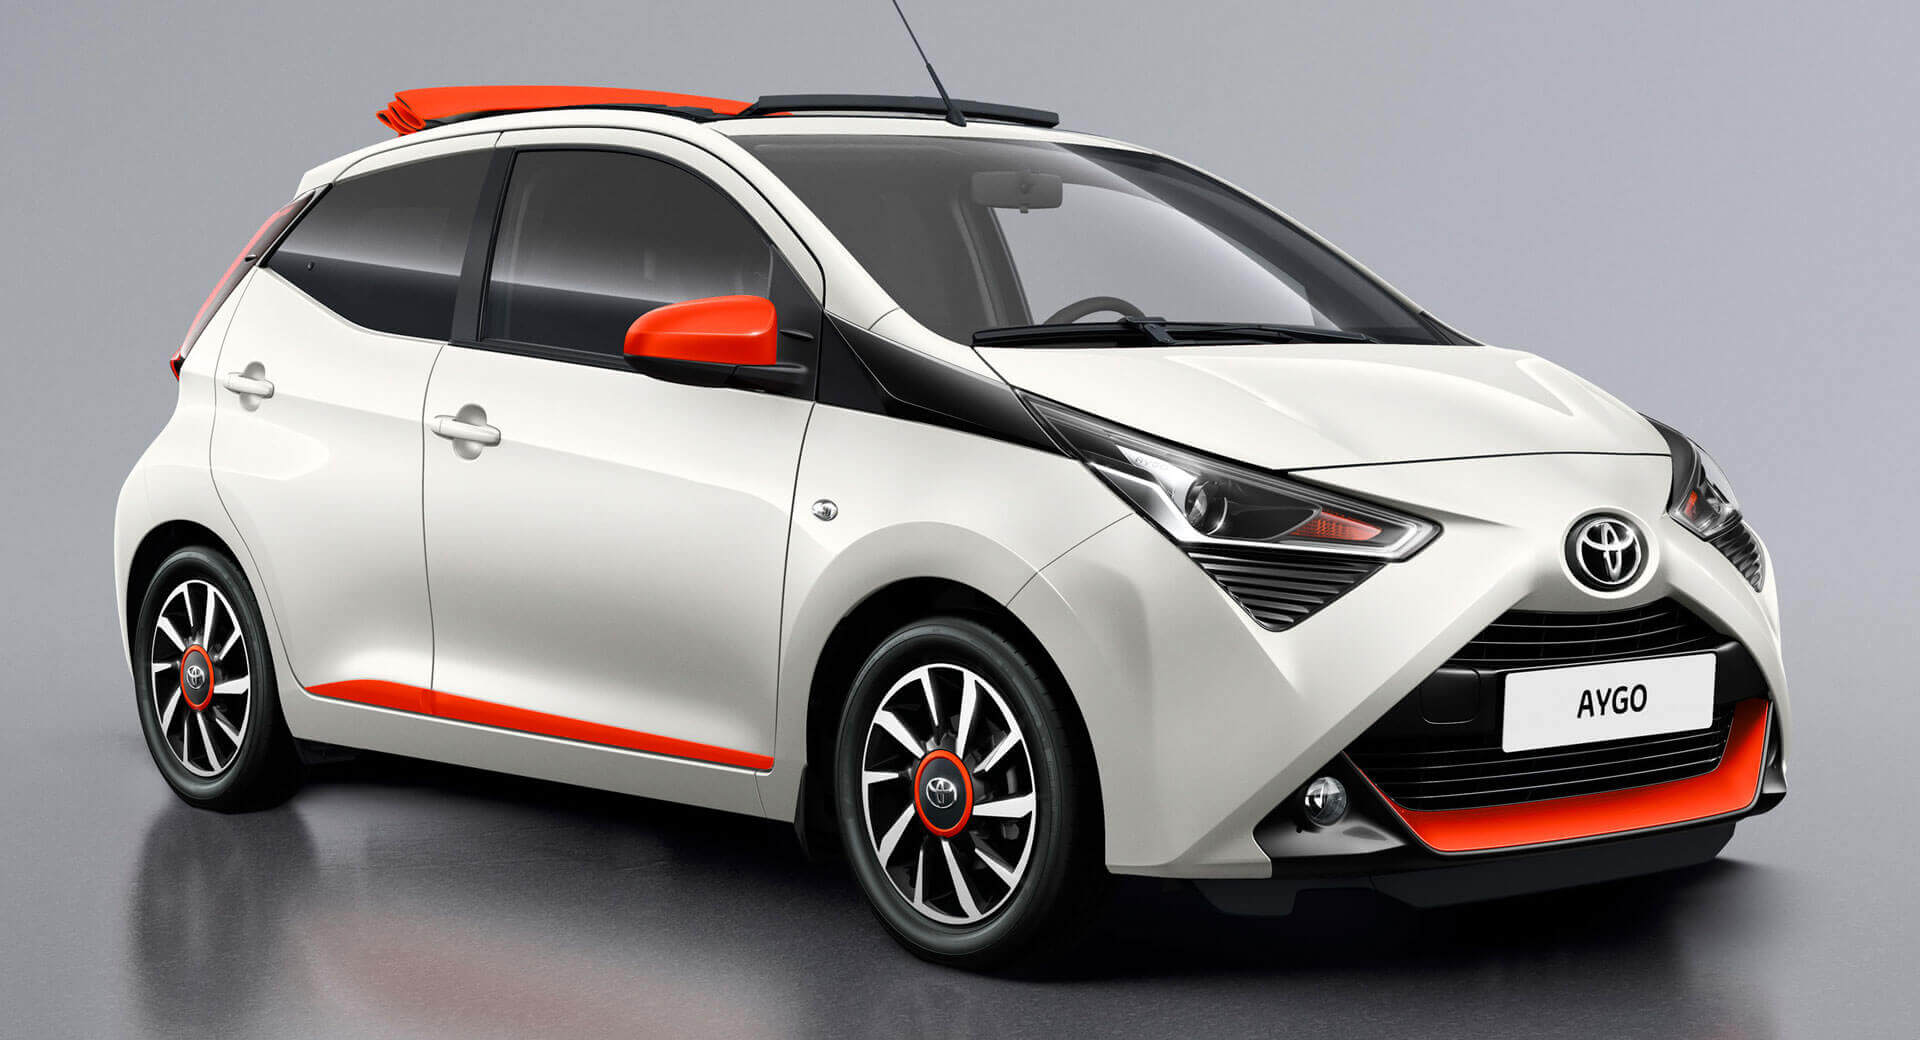 https://www.carscoops.com/wp-content/uploads/2019/02/baa42299-2019-toyota-aygo-x-cite-x-style-0.jpg